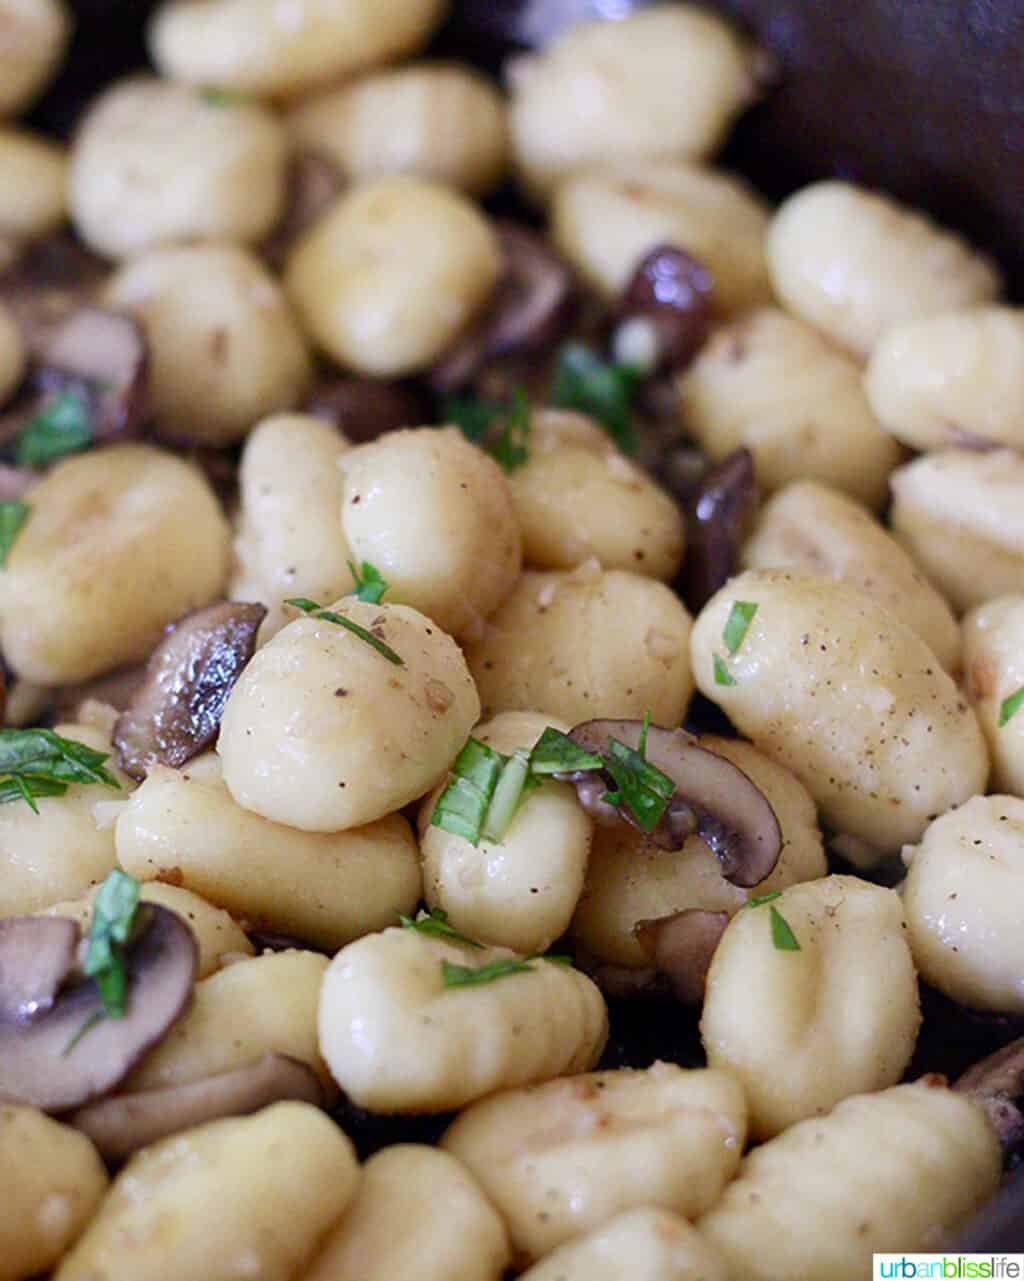 gnocchi and mushrooms cooking in a cast iron skillet.